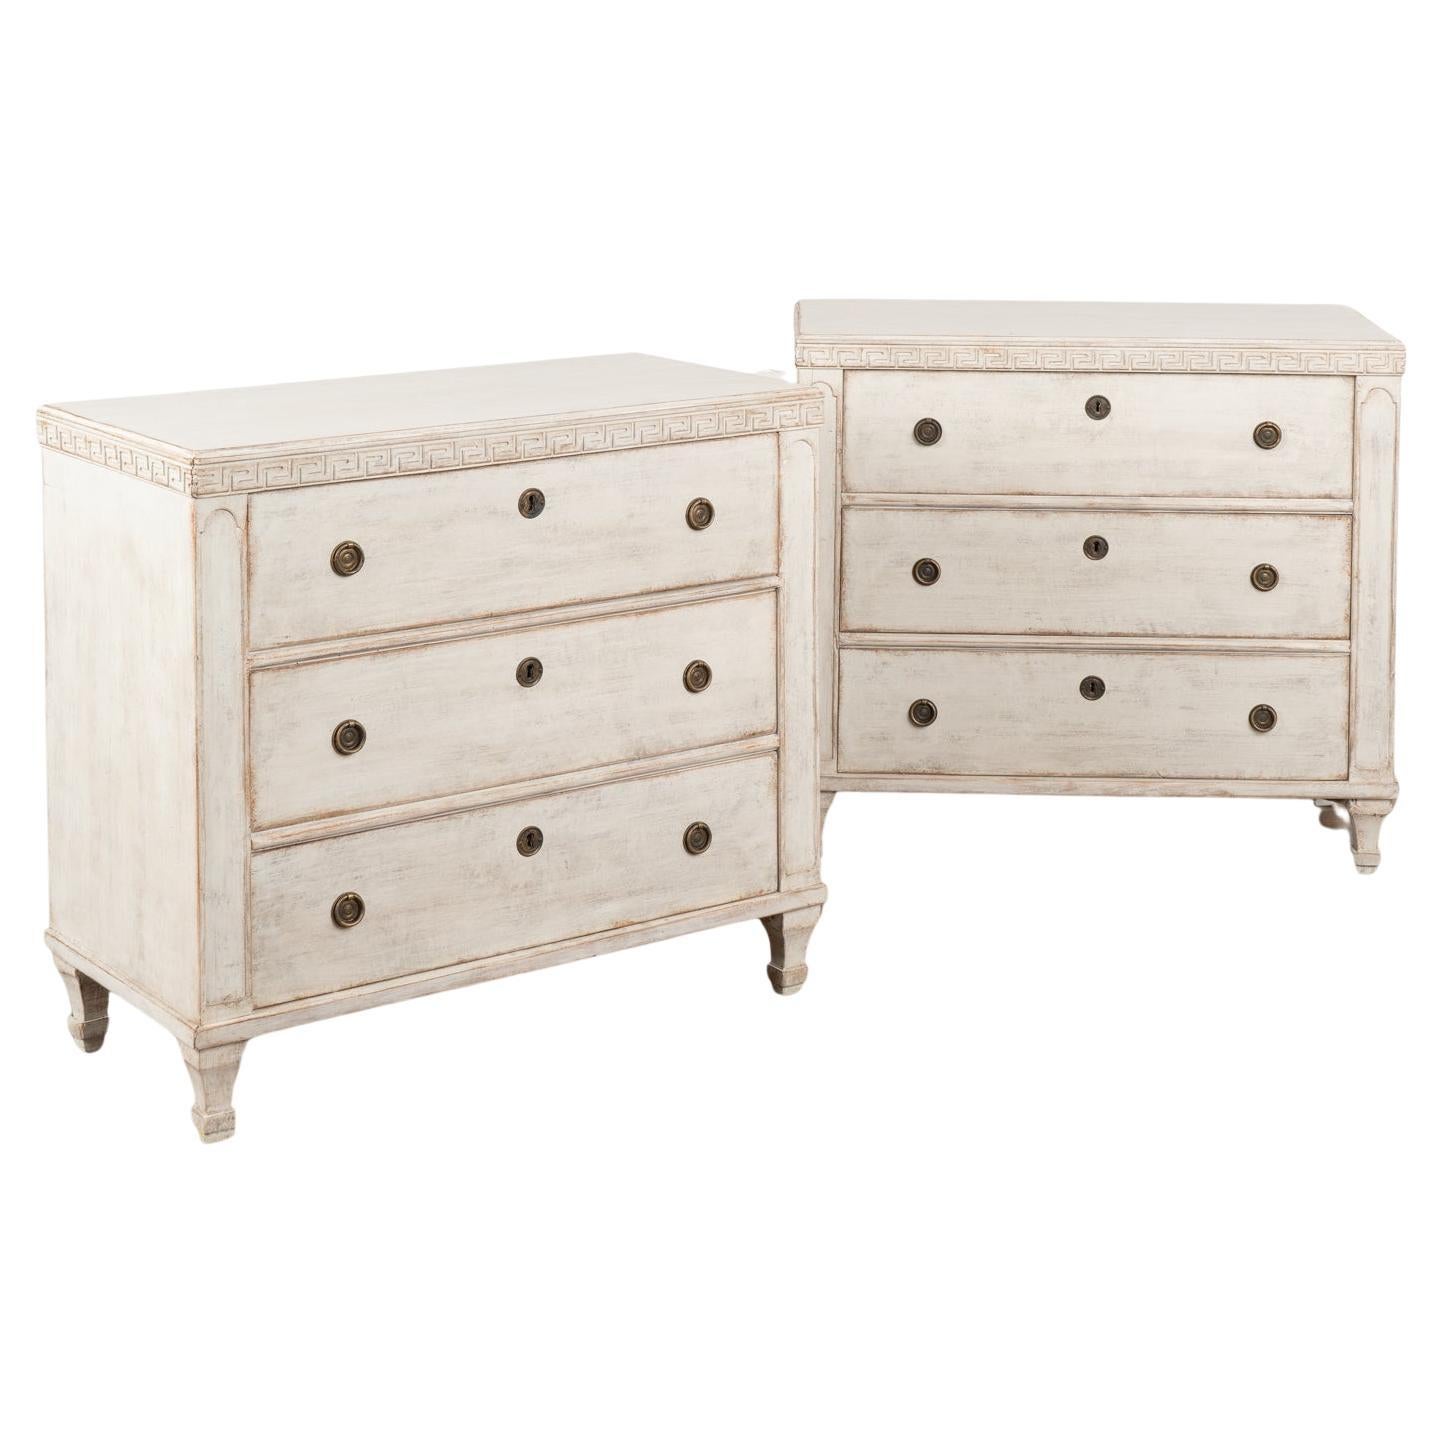 Pair of White Painted Swedish Chest of Drawers, circa 1880 For Sale